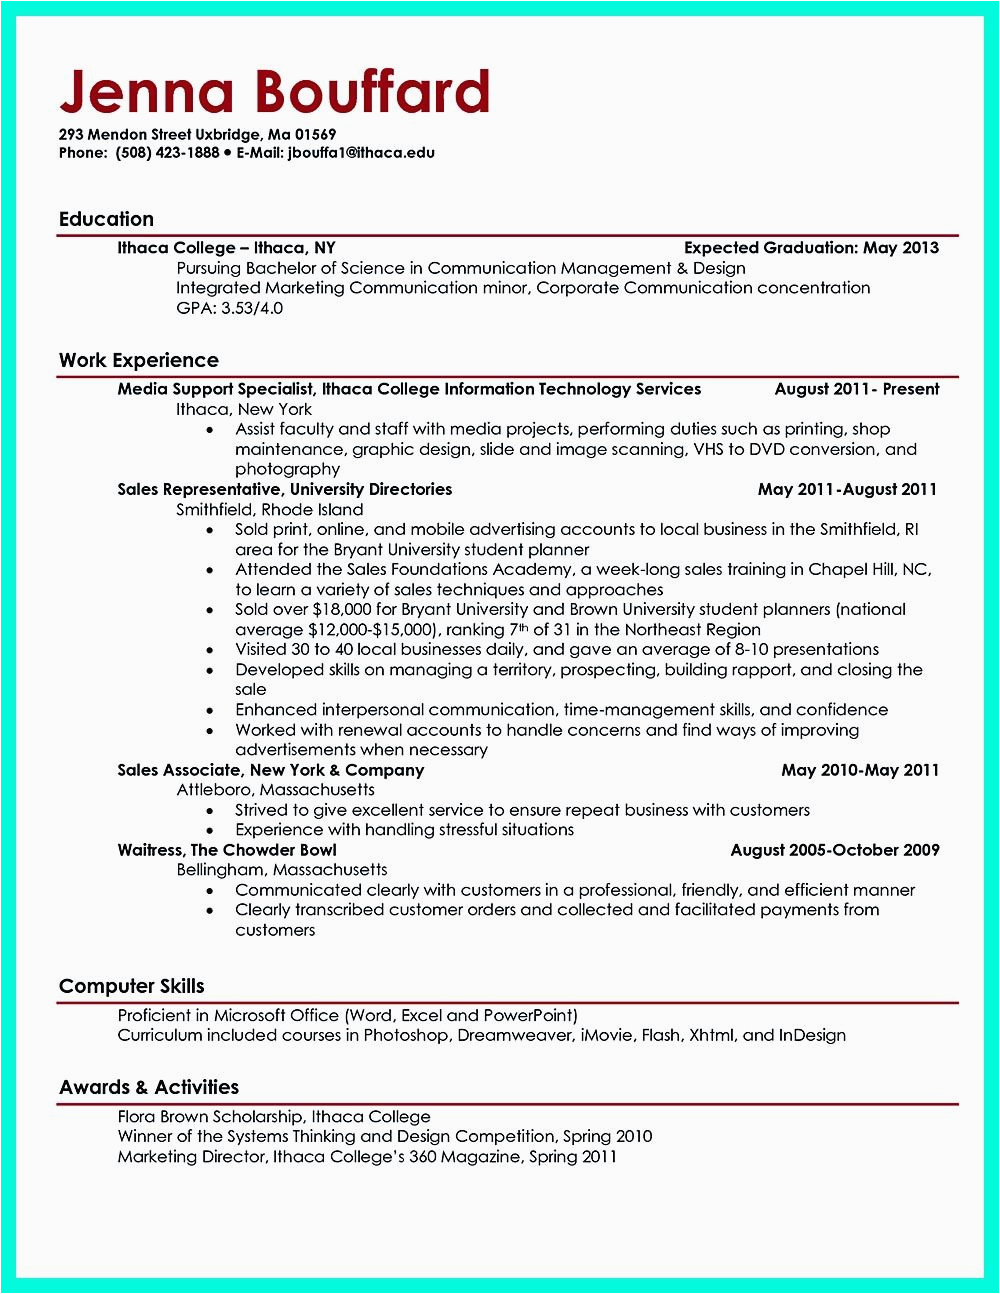 Sample Resume for College Student with Minor Best Current College Student Resume with No Experience